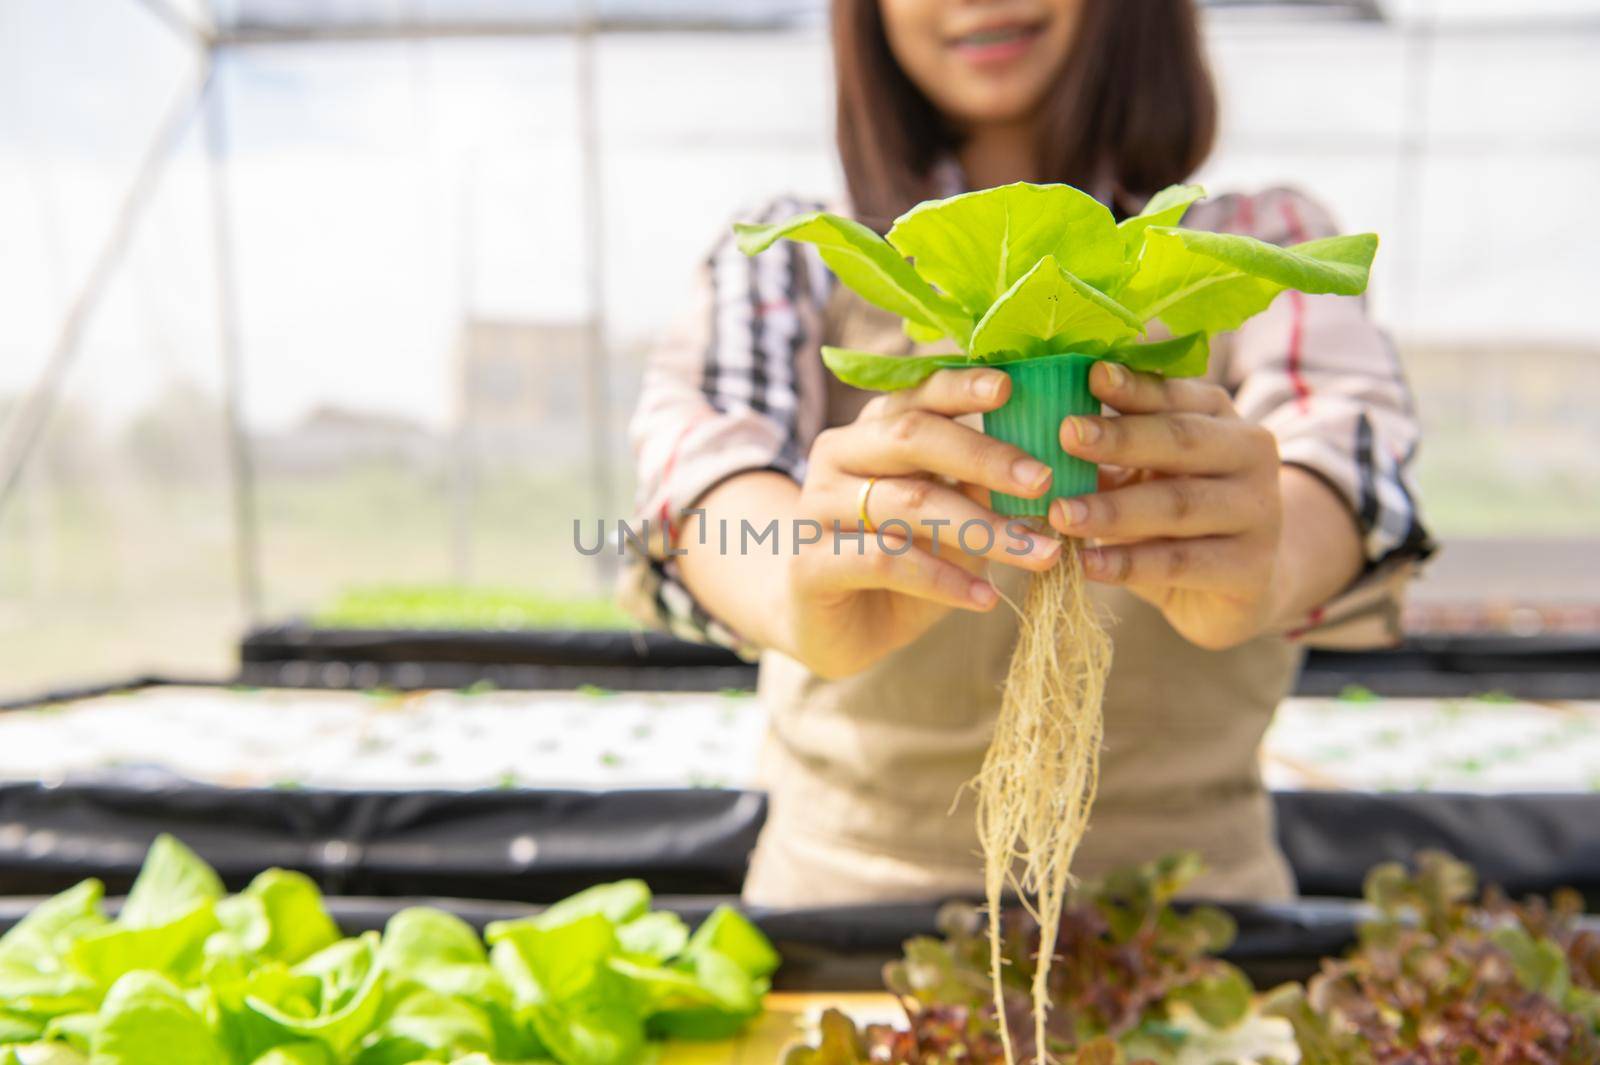 Young Asian hydroponics organic farmer collecting vegetables salad and giving in nursery greenhouse. People lifestyles and business. Indoor agriculture and cultivation  environment gardener concept by MiniStocker